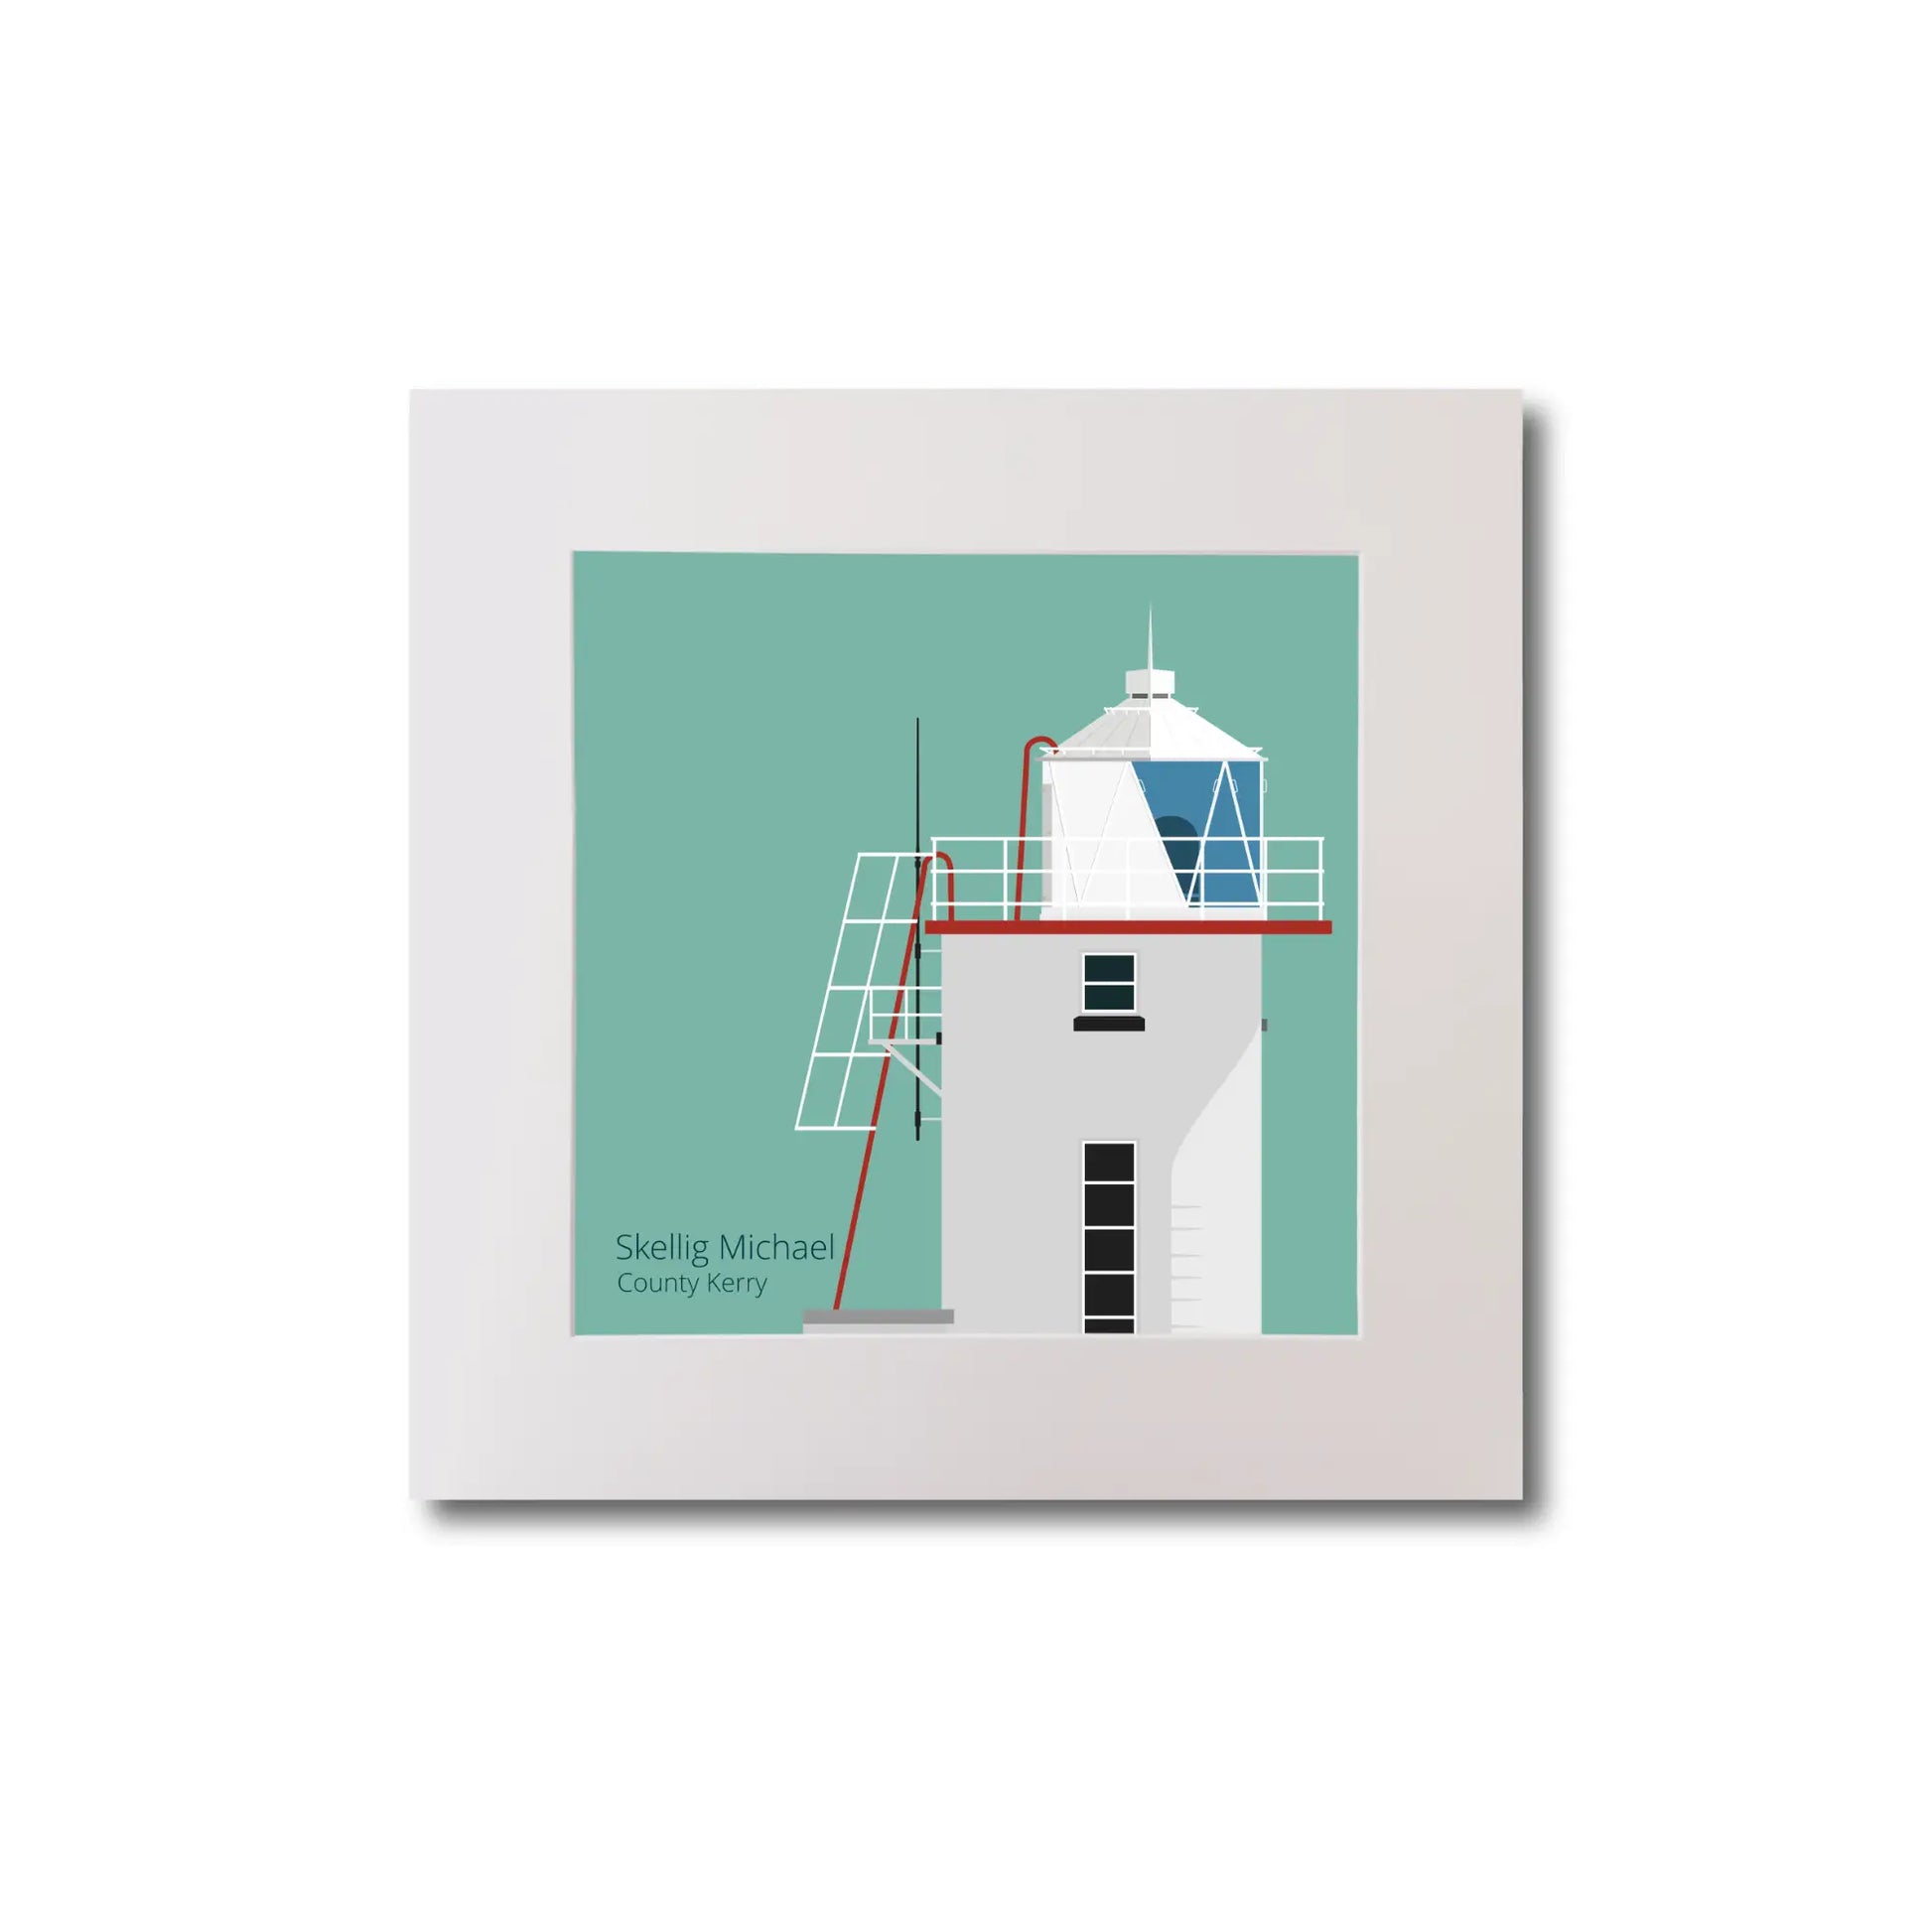 Illustration of Skellig Michael lighthouse on an ocean green background, mounted and measuring 20x20cm.